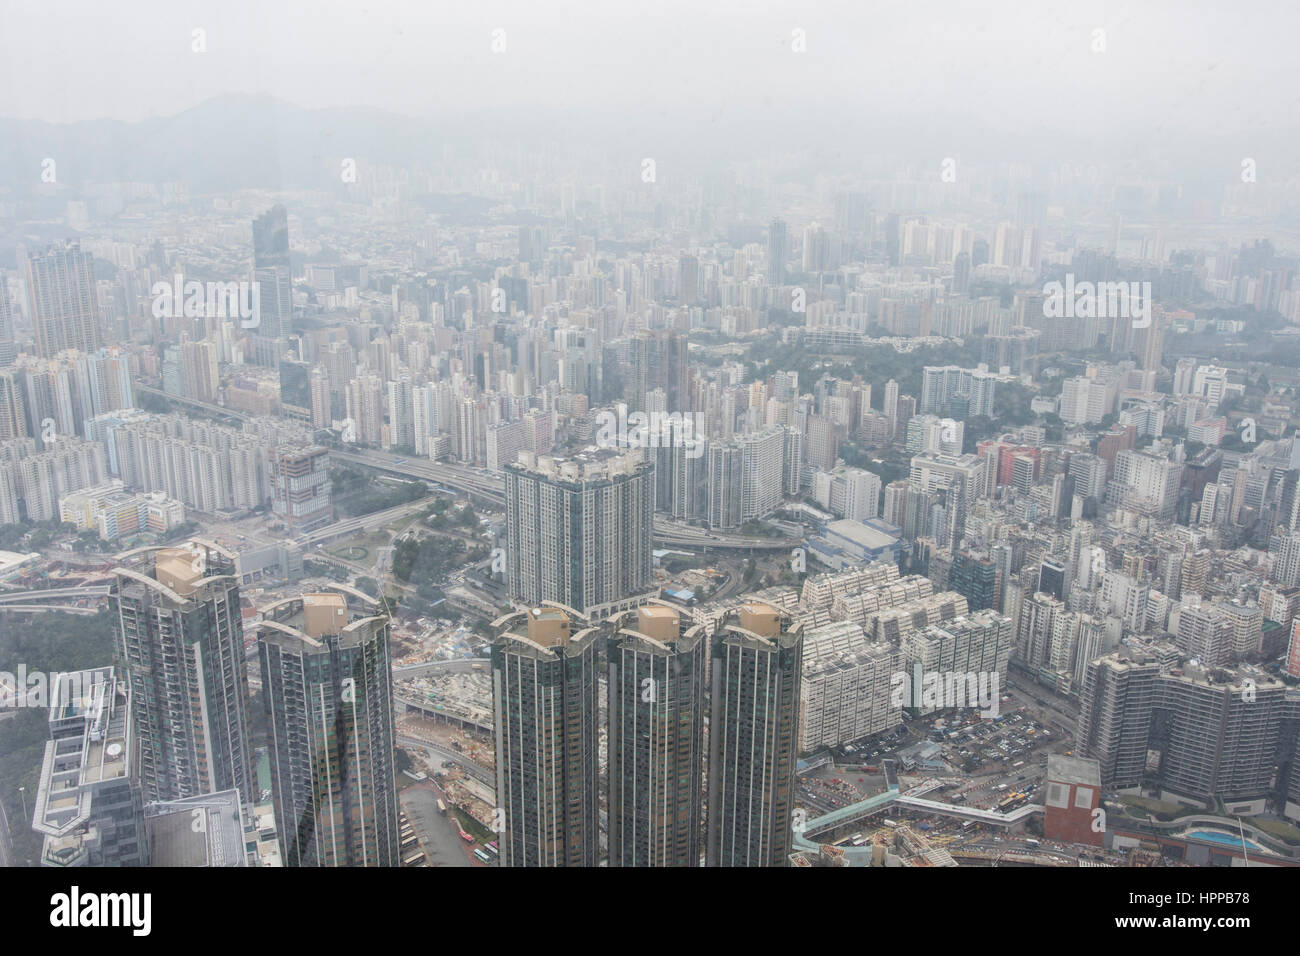 panoramic view of Hong Kong from the International Commerce Center skyscraper in a cloudy day. Stock Photo